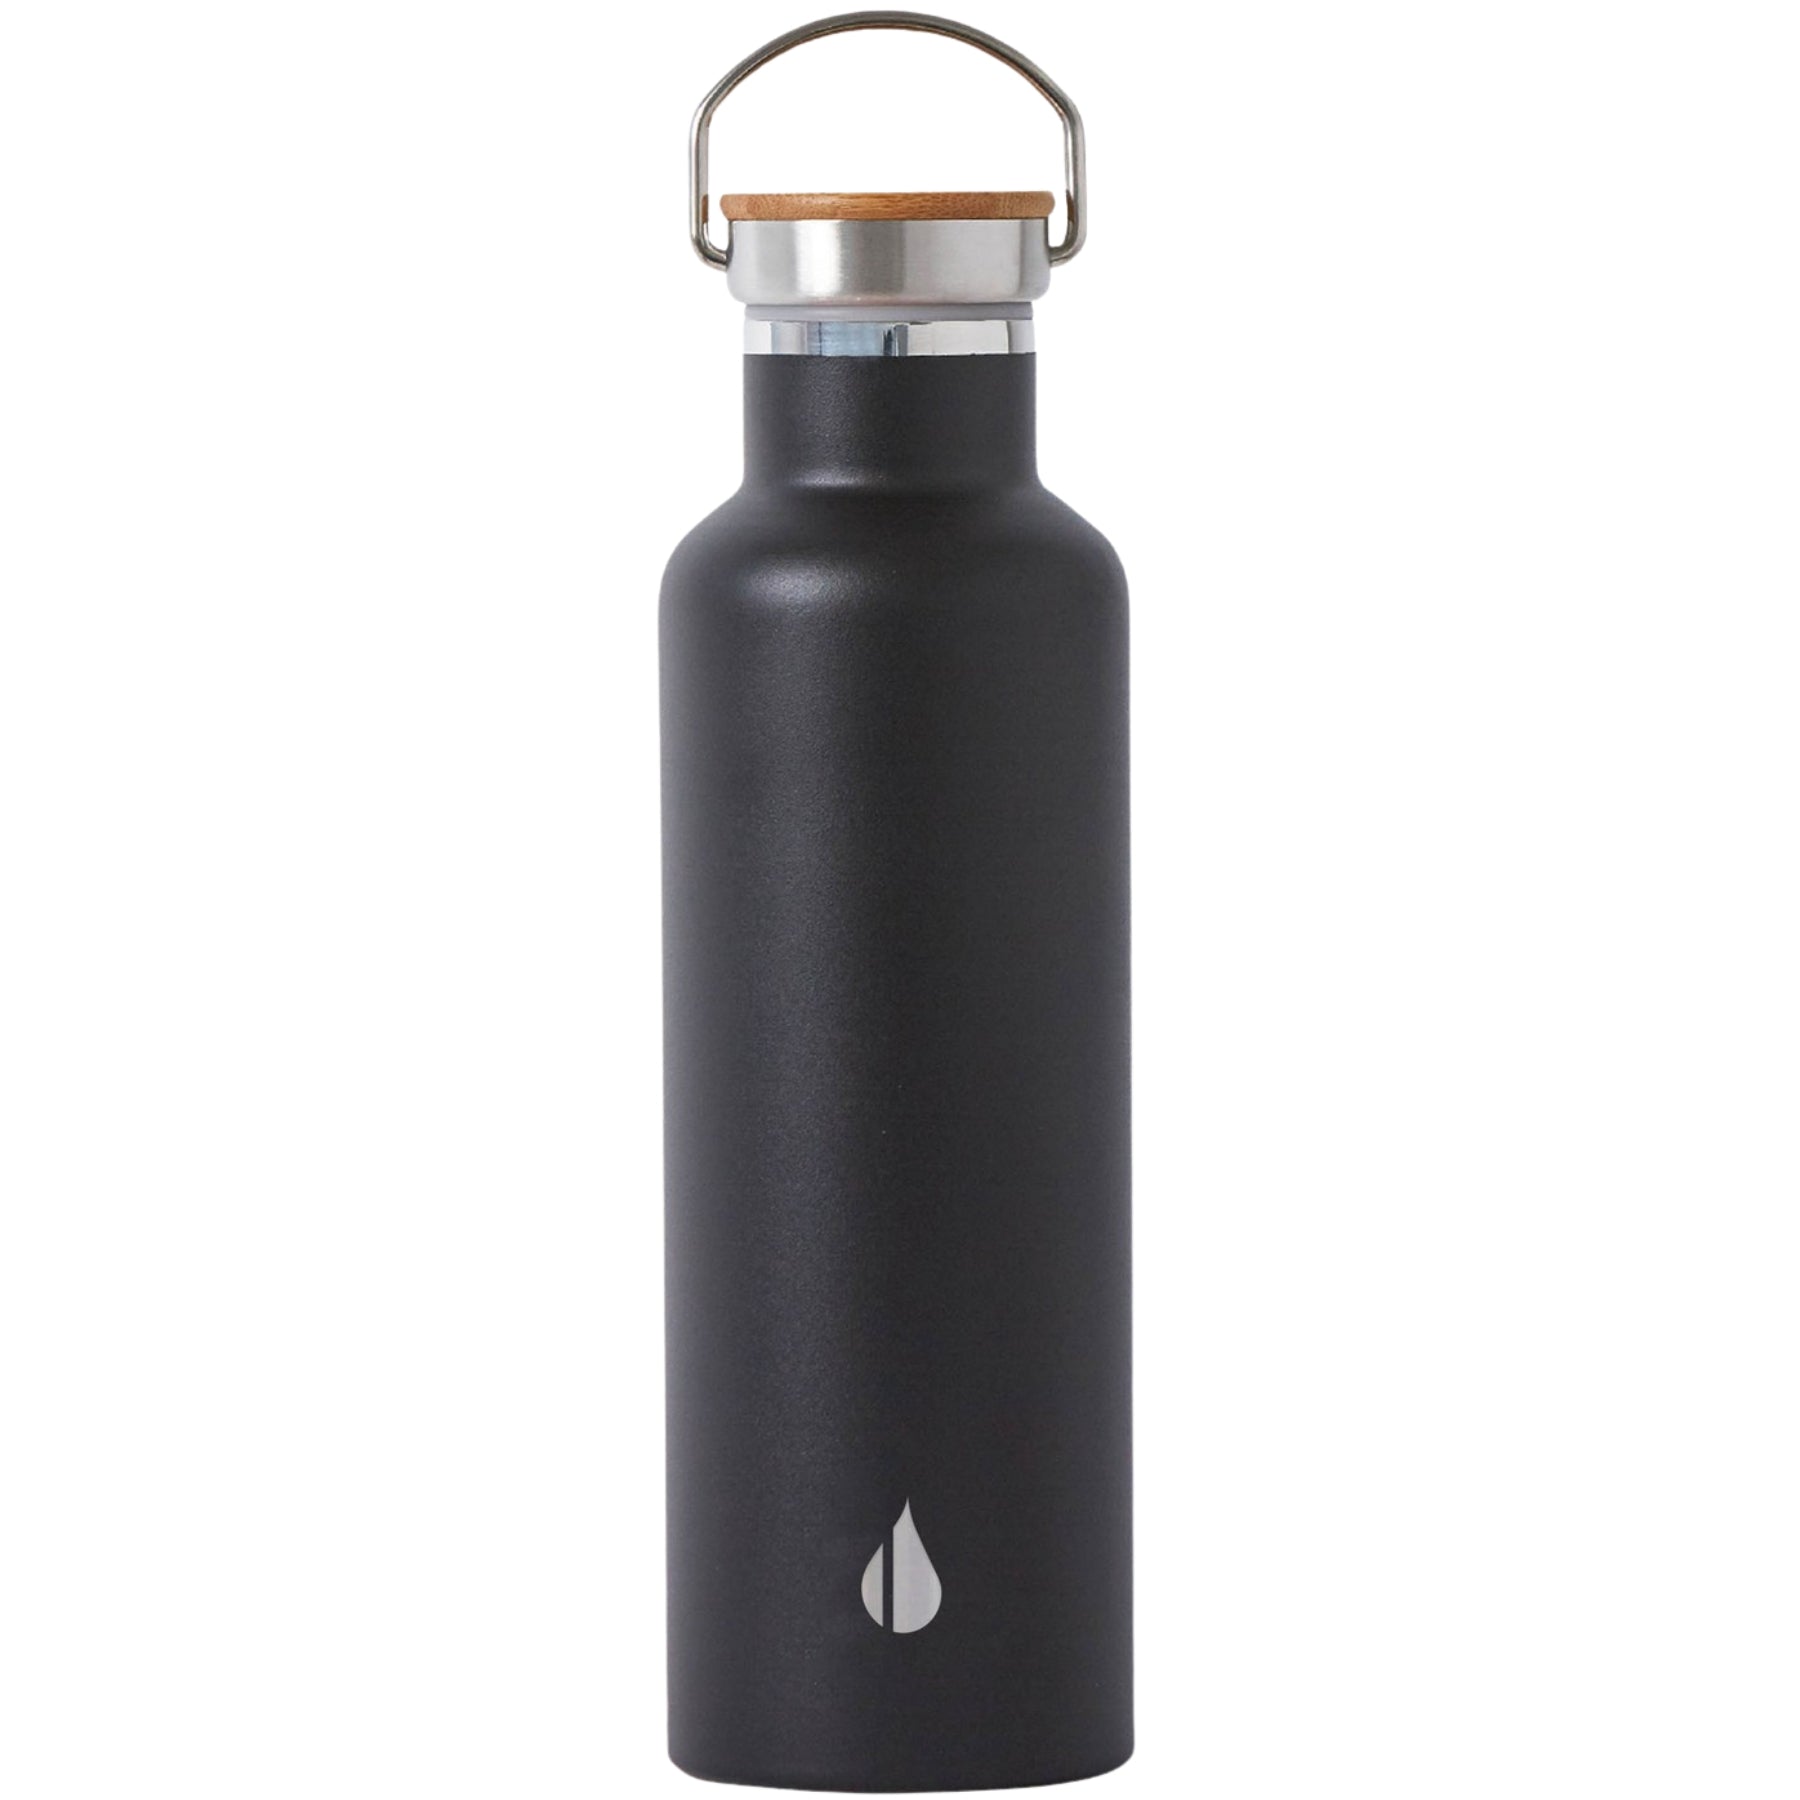 Customizable Elemental® 25 oz Stainless Steel Insulated Bottle in black